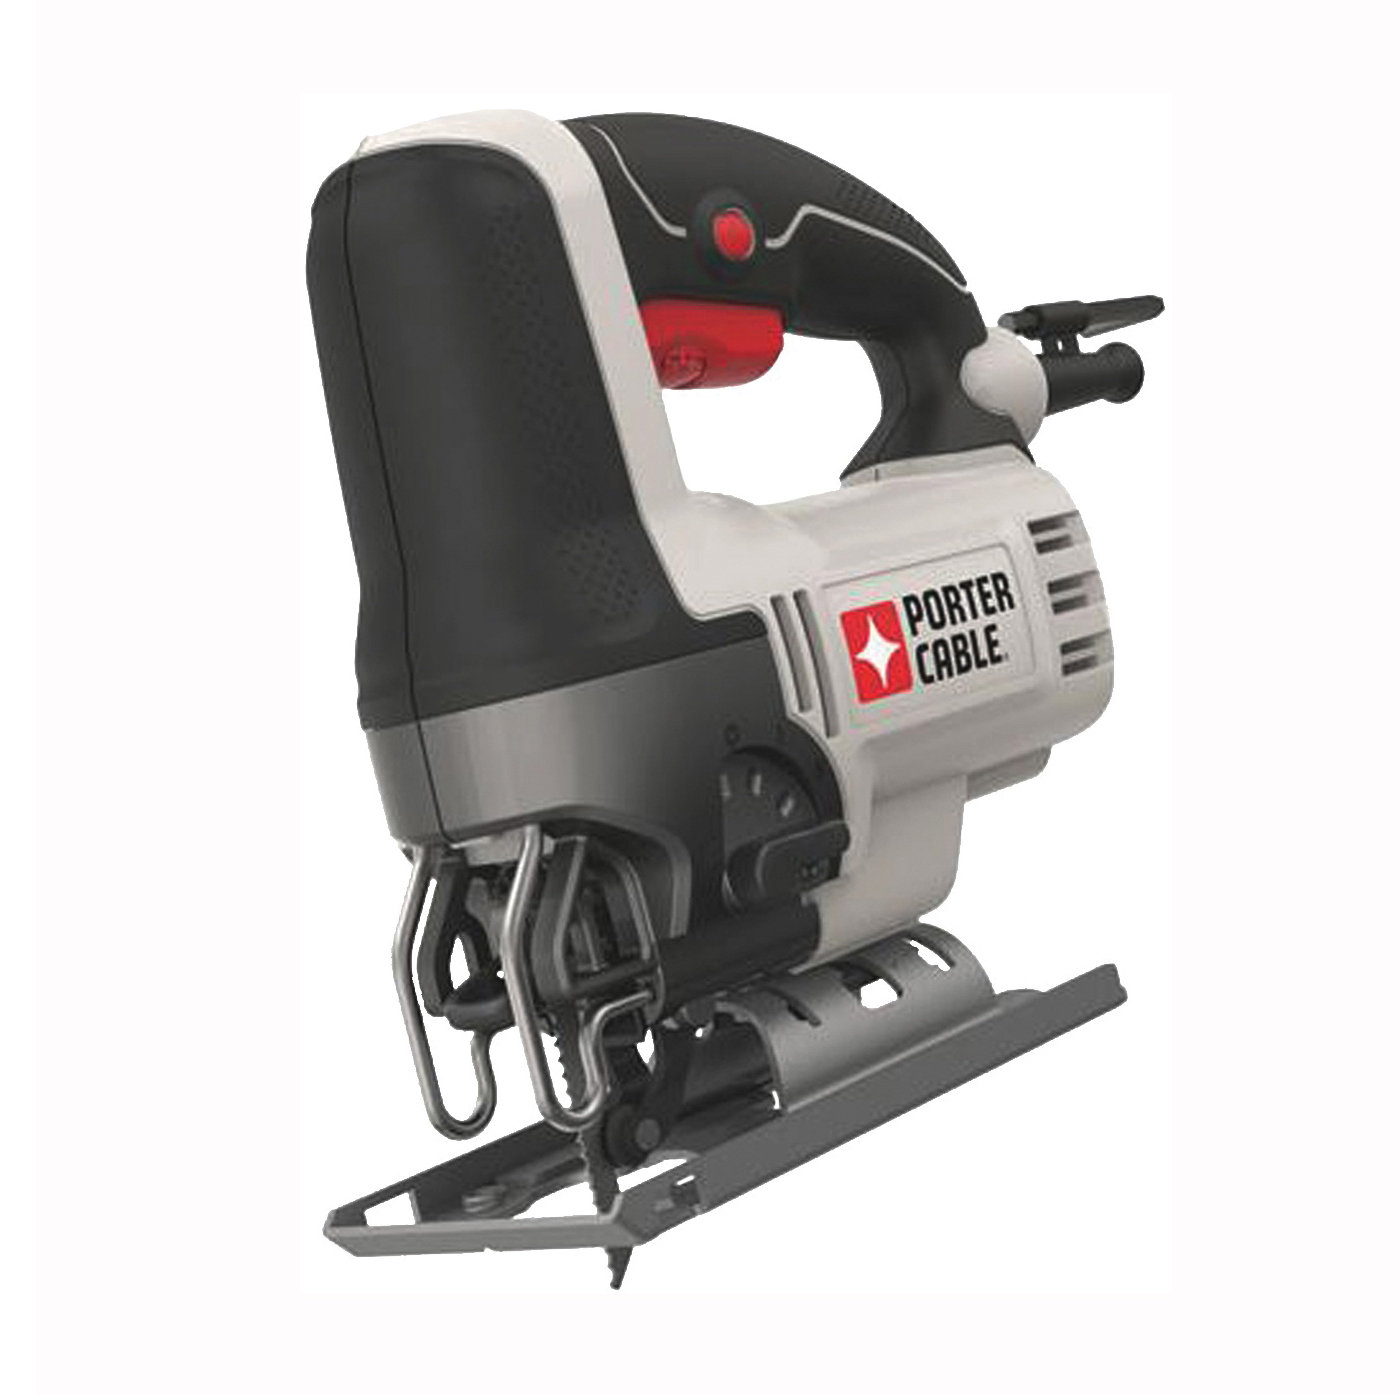 Buy Porter-Cable PCE345 Jig Saw, A, 0.813 in Cutting Capacity, 13/16 in L  Stroke, 3200 spm, 7-Speed